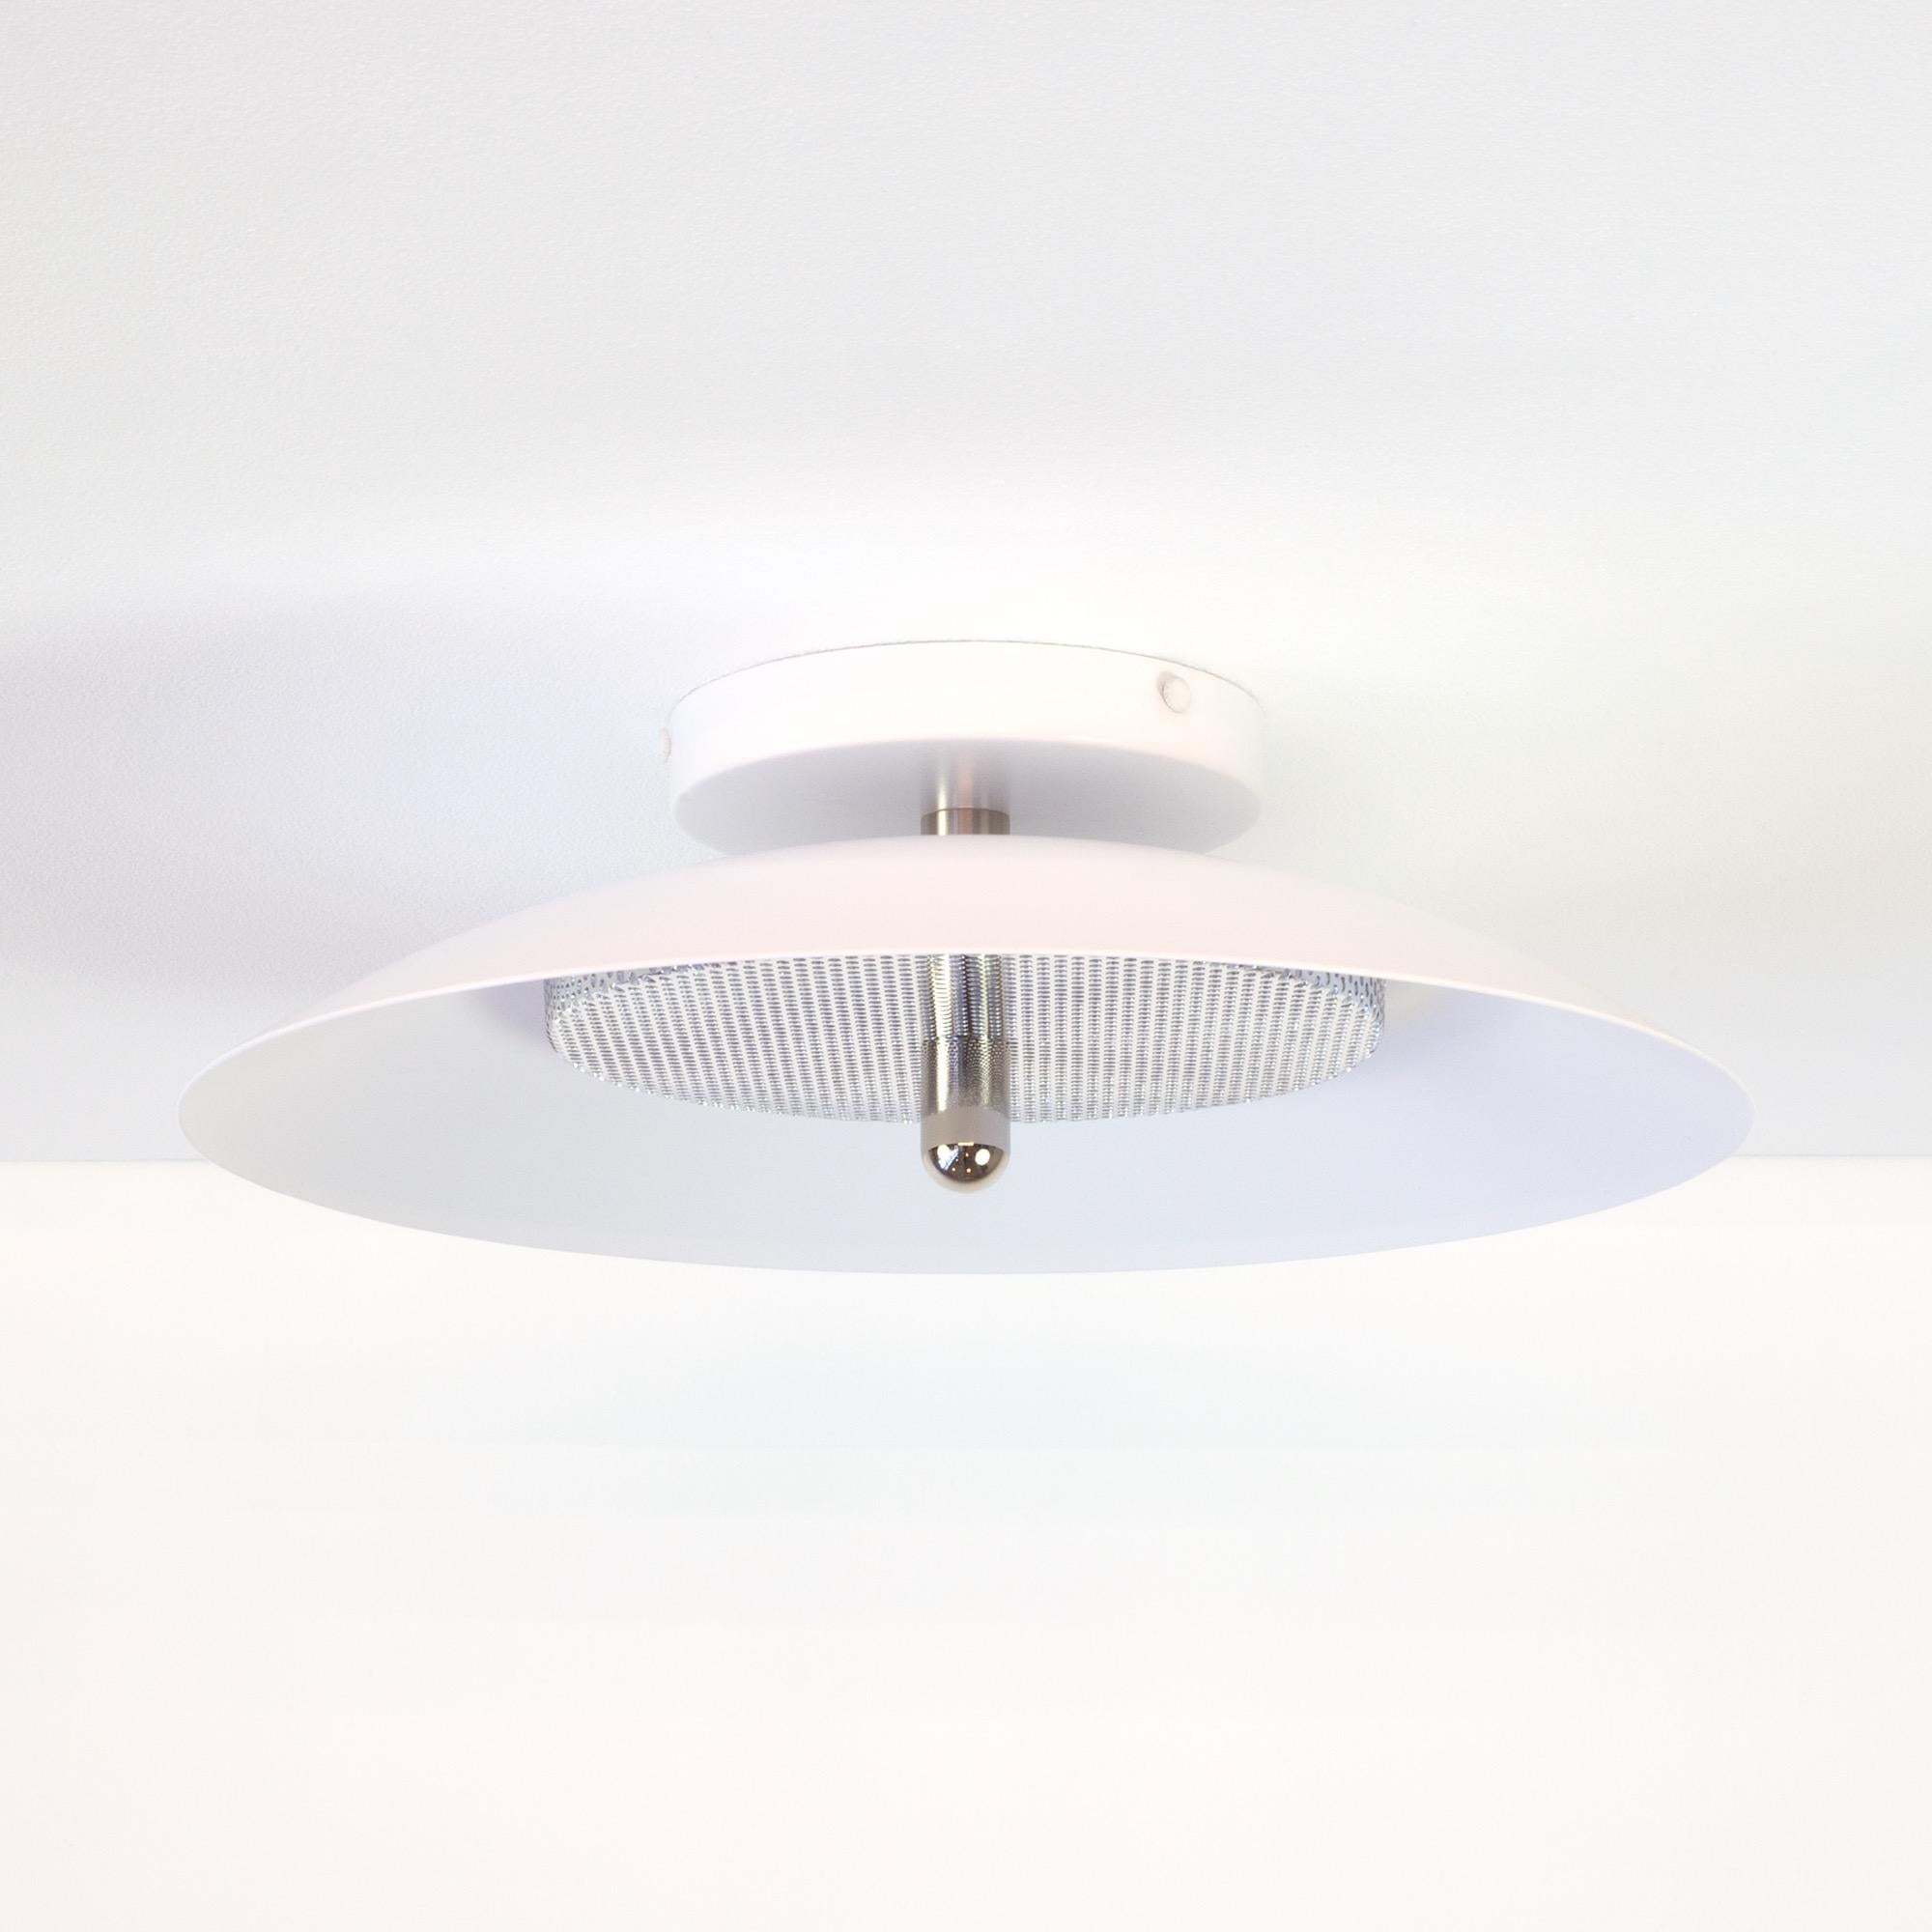 This listing is for 2 Flush Mount from Souda.
Composed of a spun metal shade that reflects light filtered through a perforated metal diffuser, the subtle warmth of the signal sconce is perfectly balanced by it’s striking form. With their refined